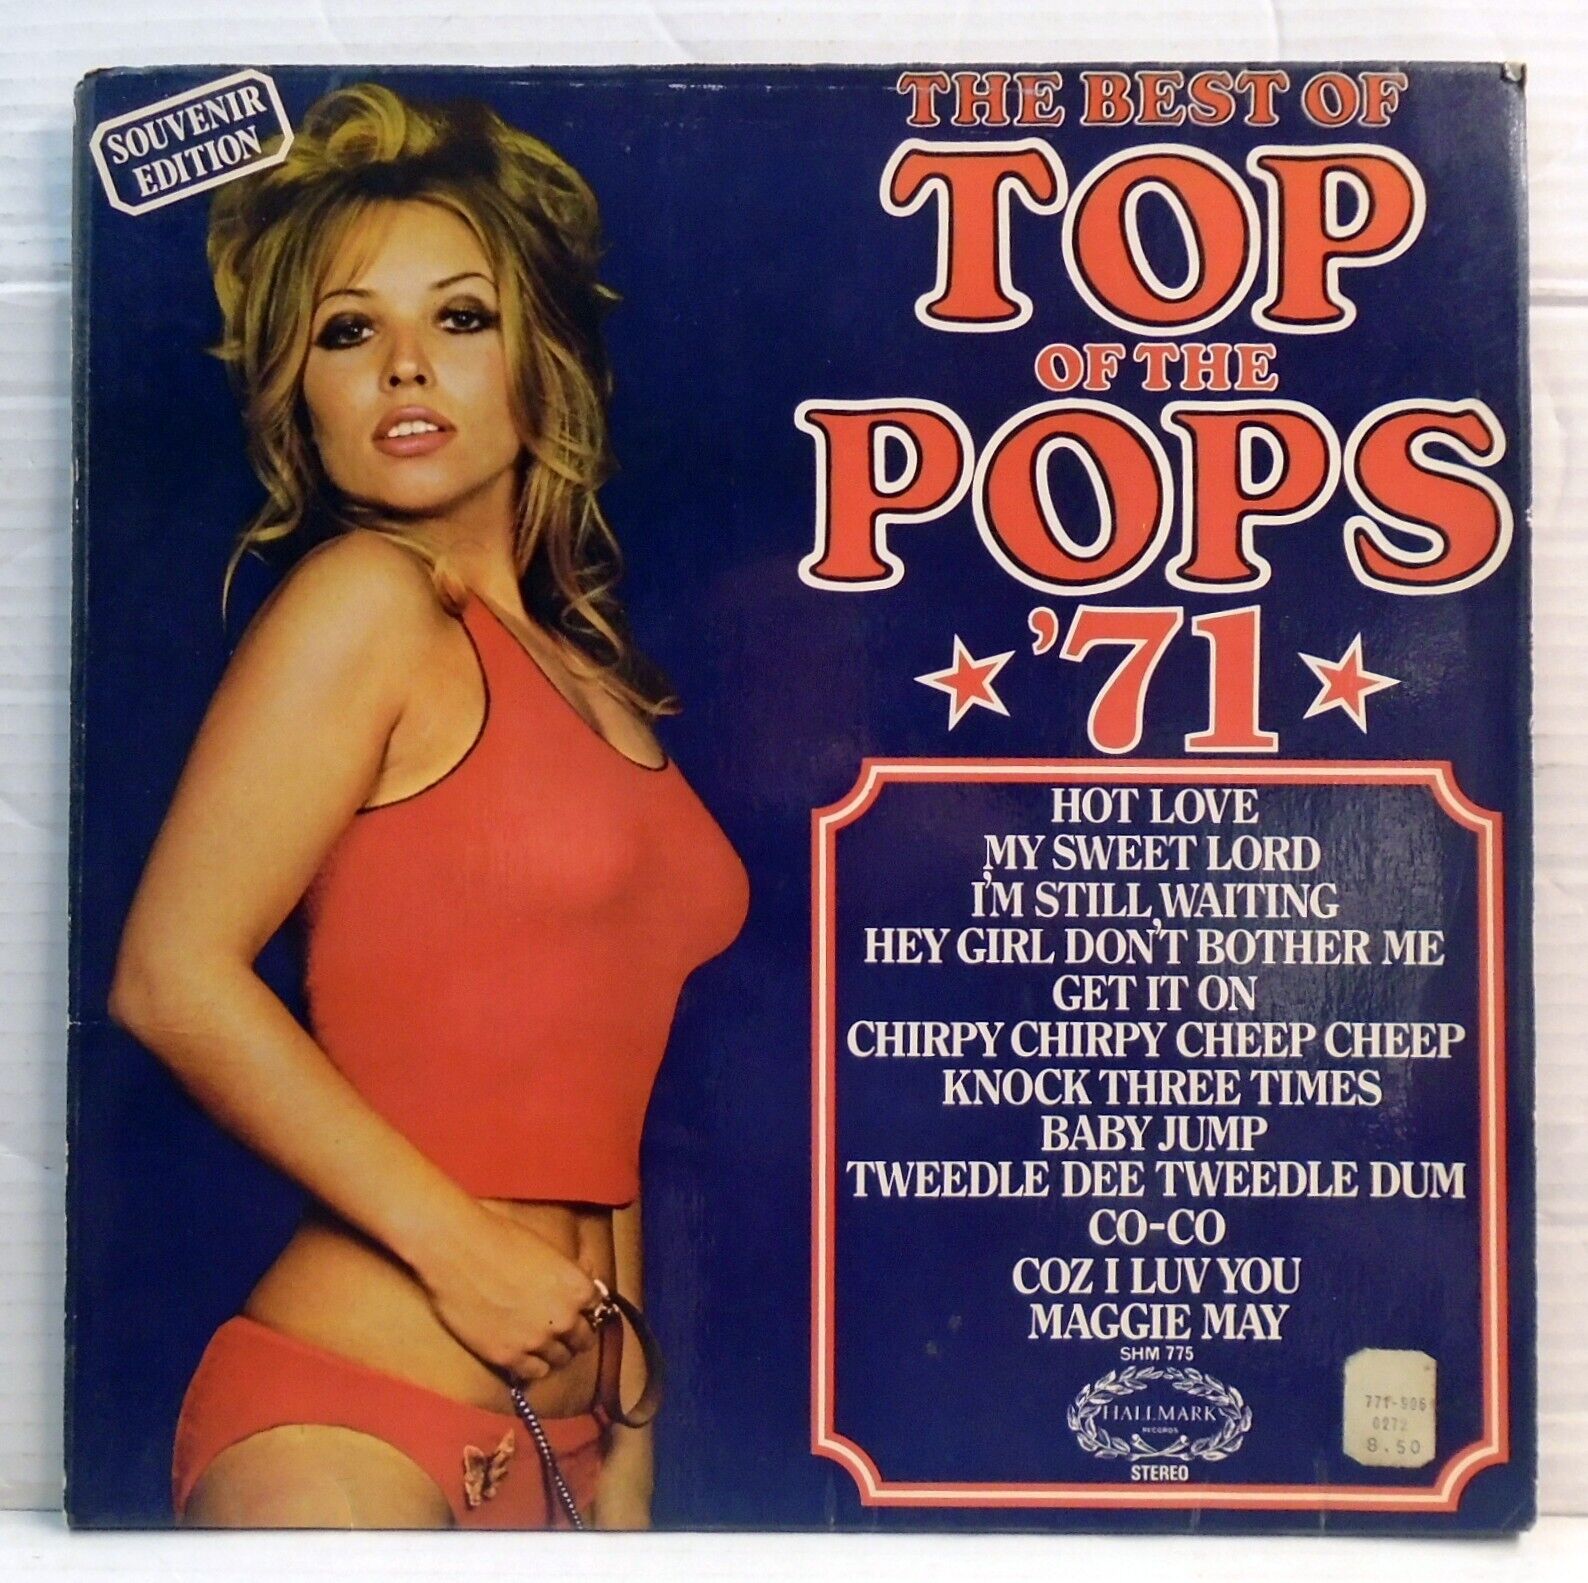 The Best of the Top of The Pops 1971 Souvenir Edition - SHM775 Pin up cover